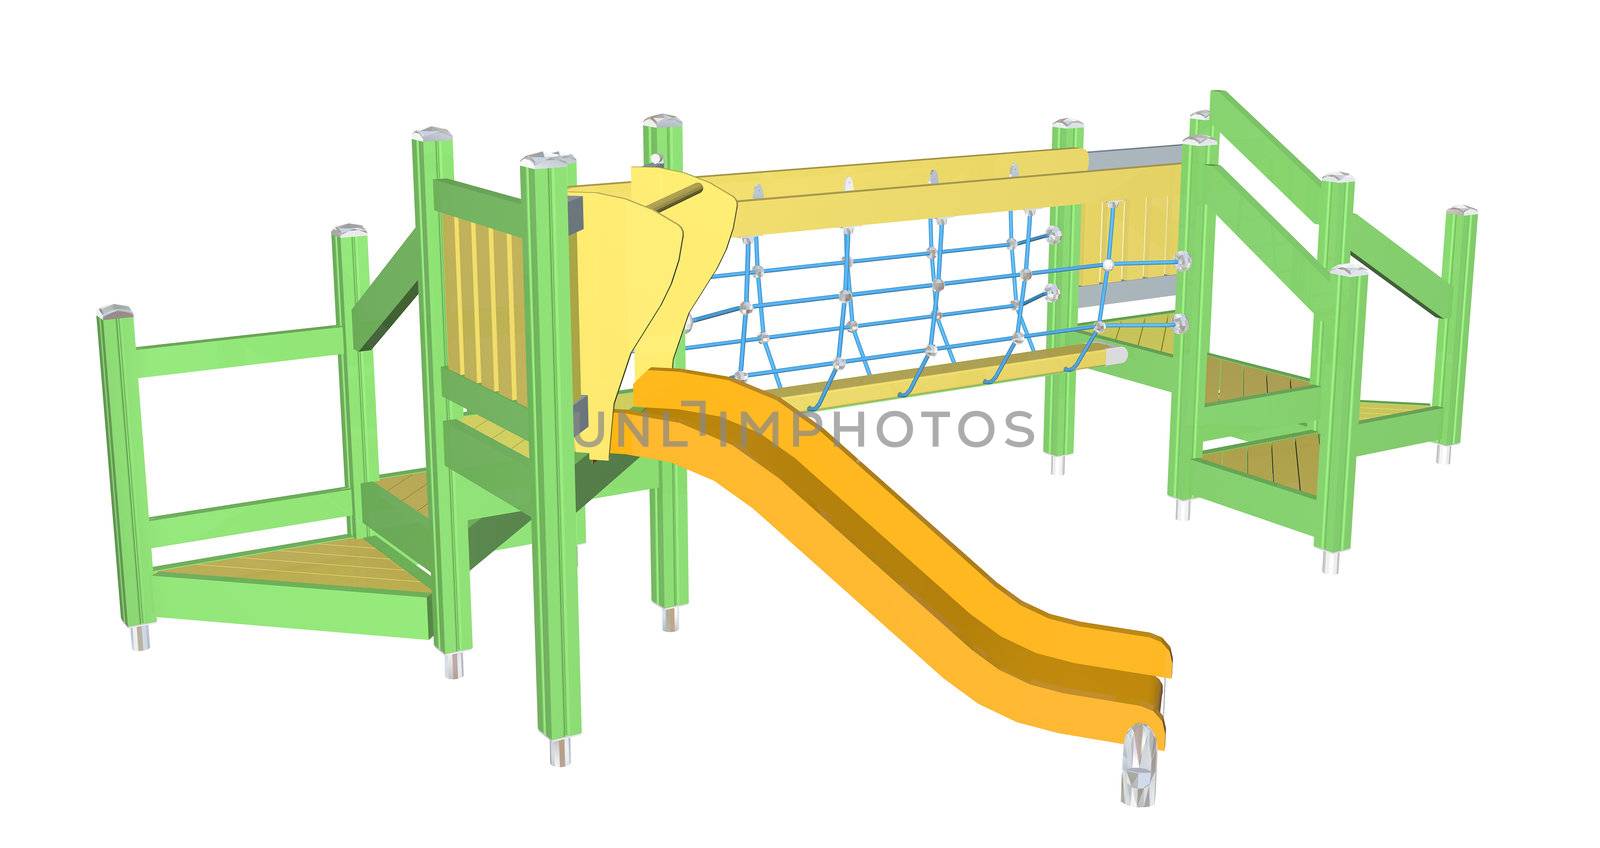 Kiddie Slide and Crawling Net, yellow and green, 3D illustration, isolated against a white background.